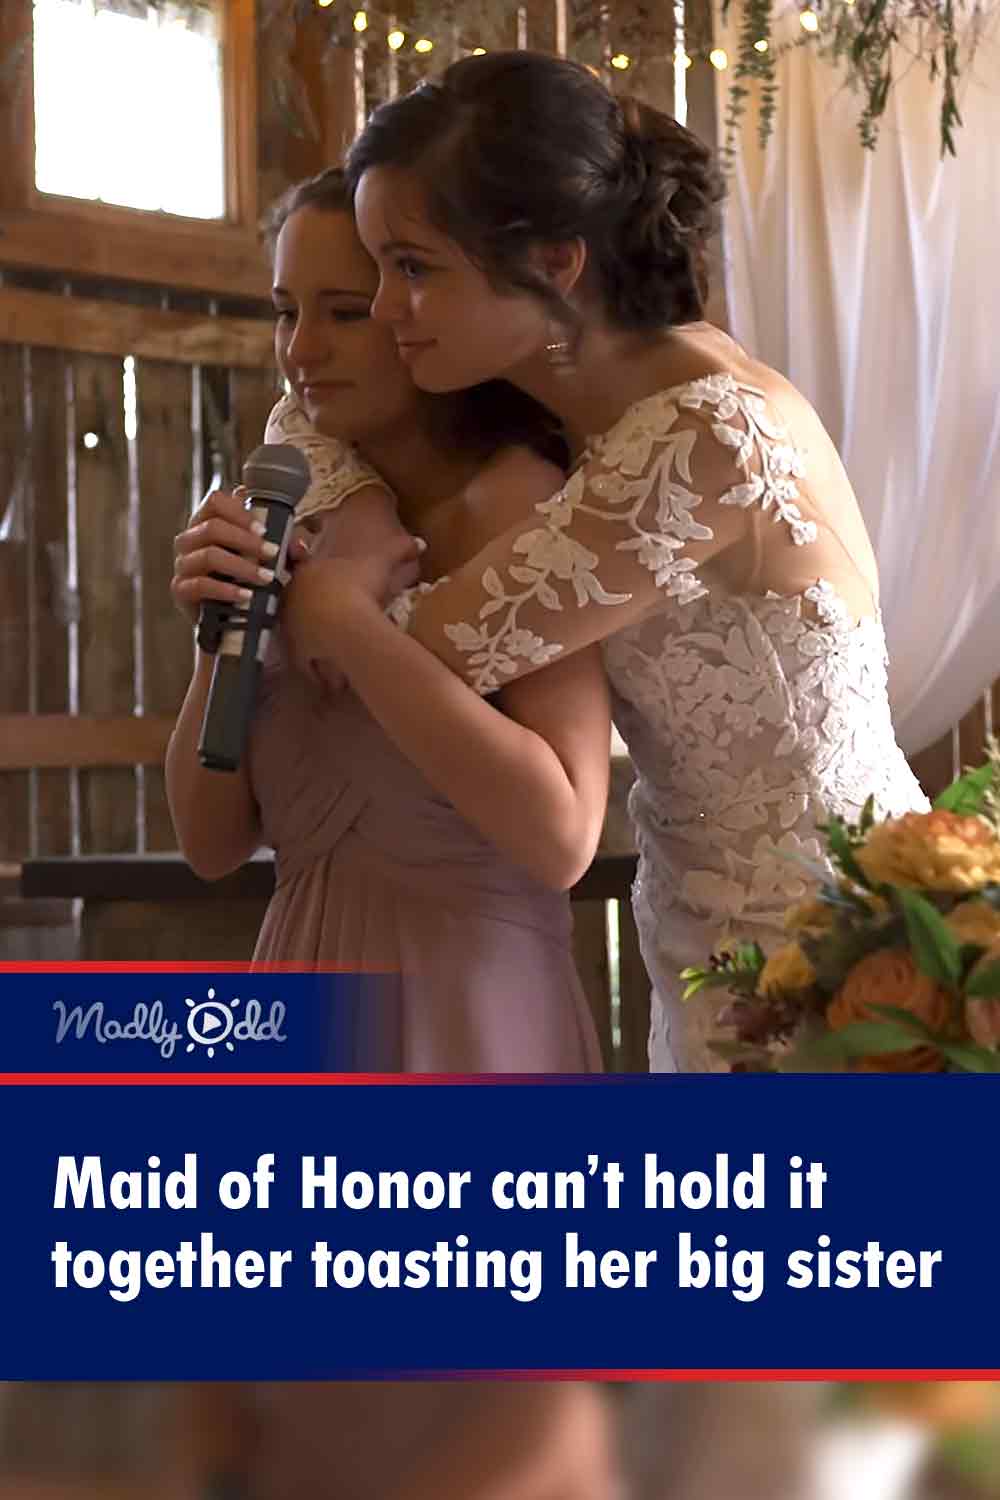 Maid of Honor can’t hold it together toasting her big sister